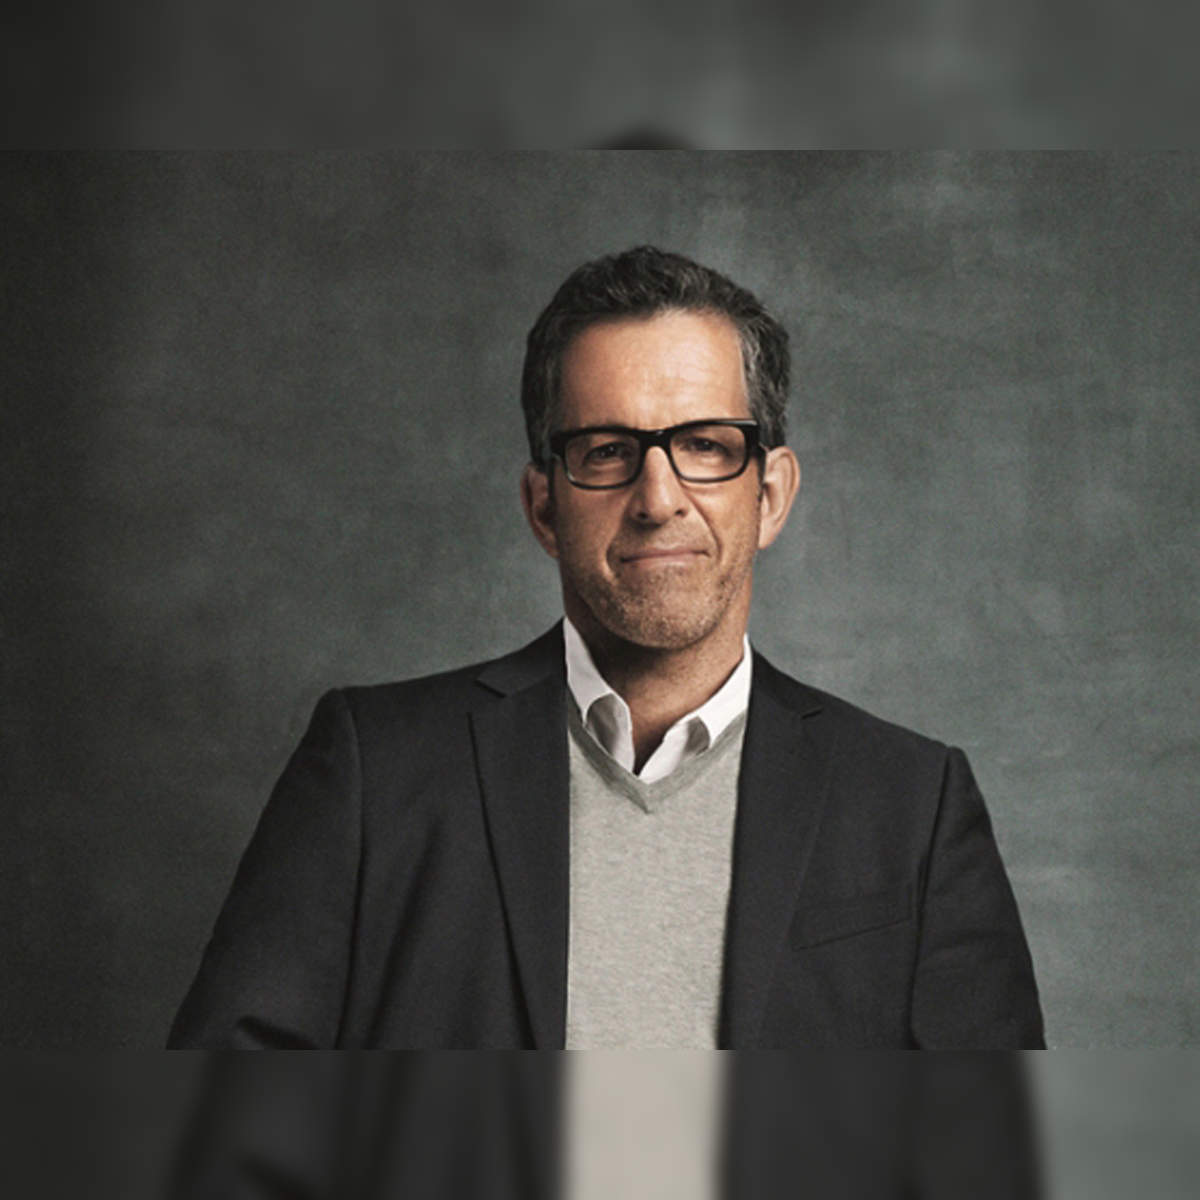 Kenneth Cole on the Future of Menswear